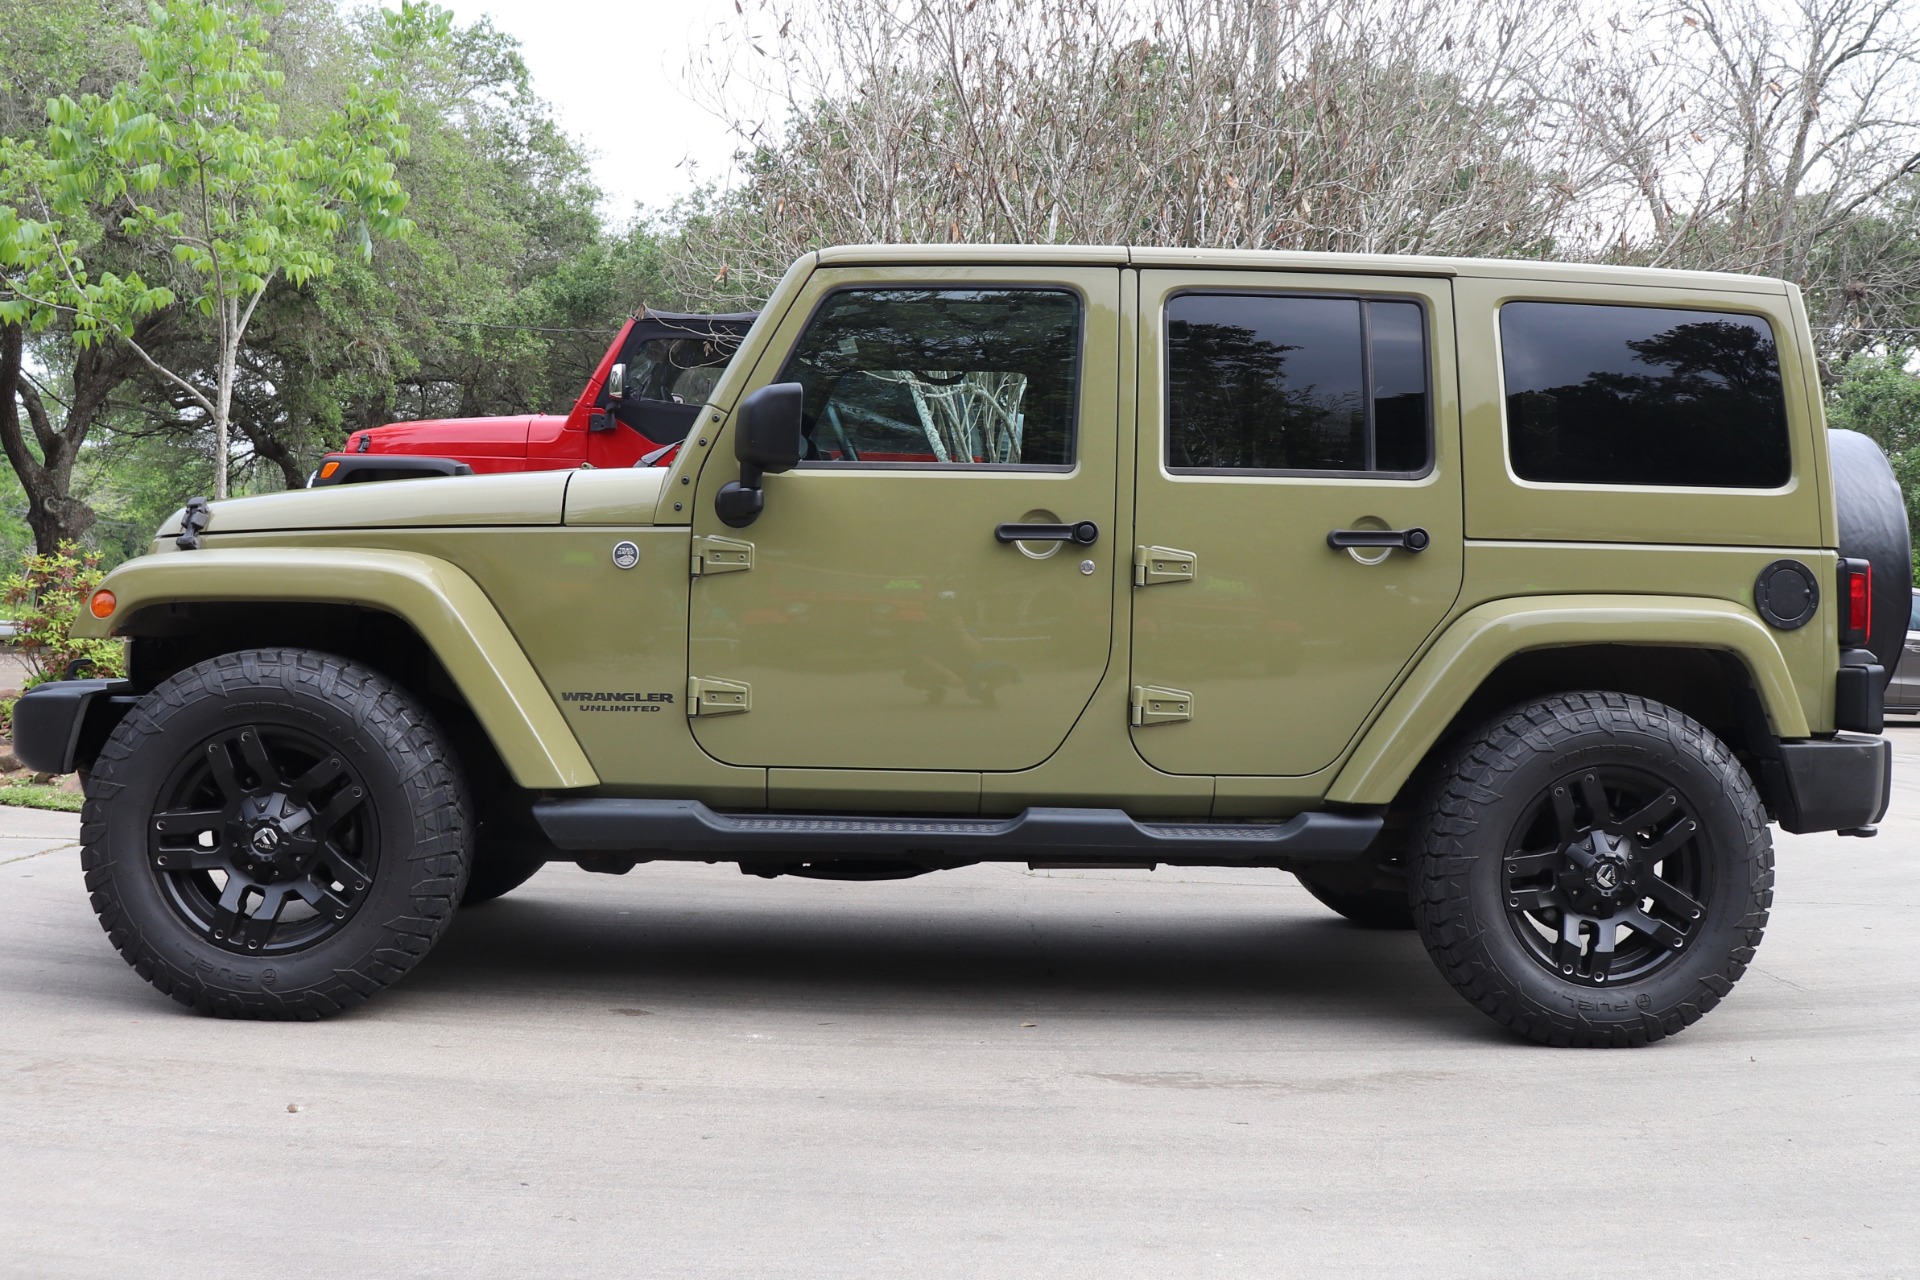 Used 2013 Jeep Wrangler Unlimited Sahara For Sale ($30,995) | Select Jeeps  Inc. Stock #617768